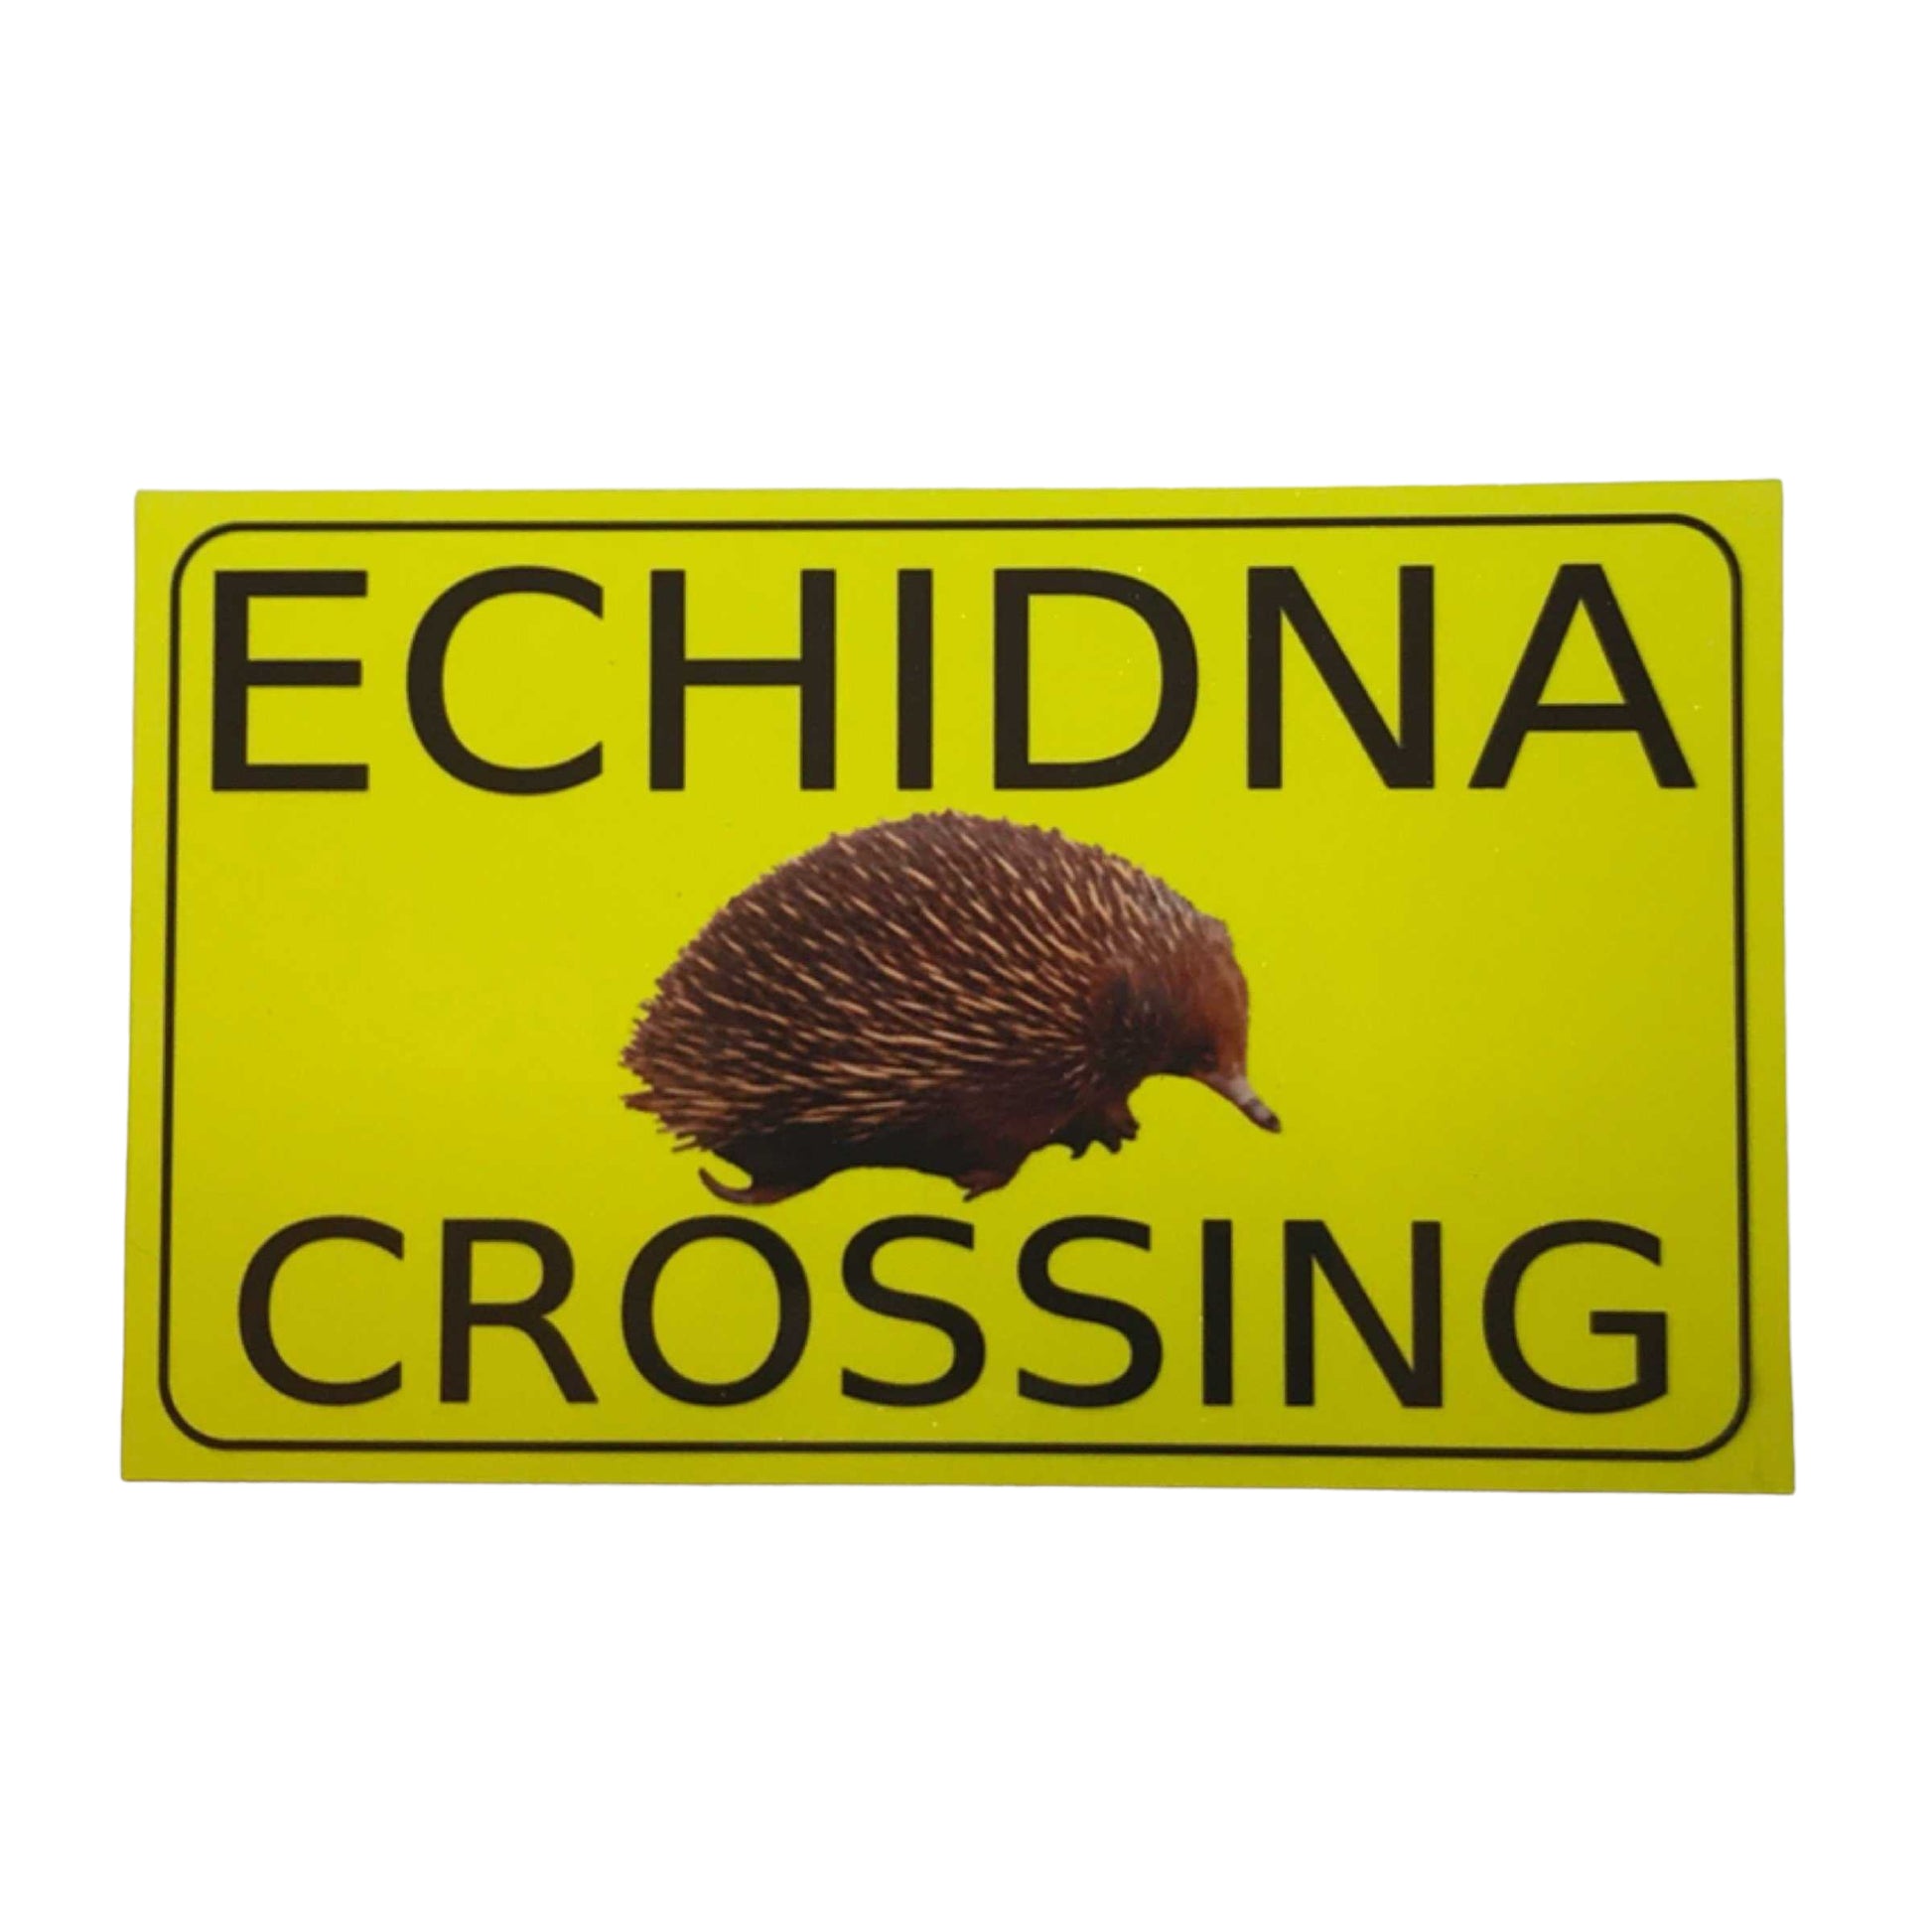 Echidna Crossing Sign - The Renmy Store Homewares & Gifts 